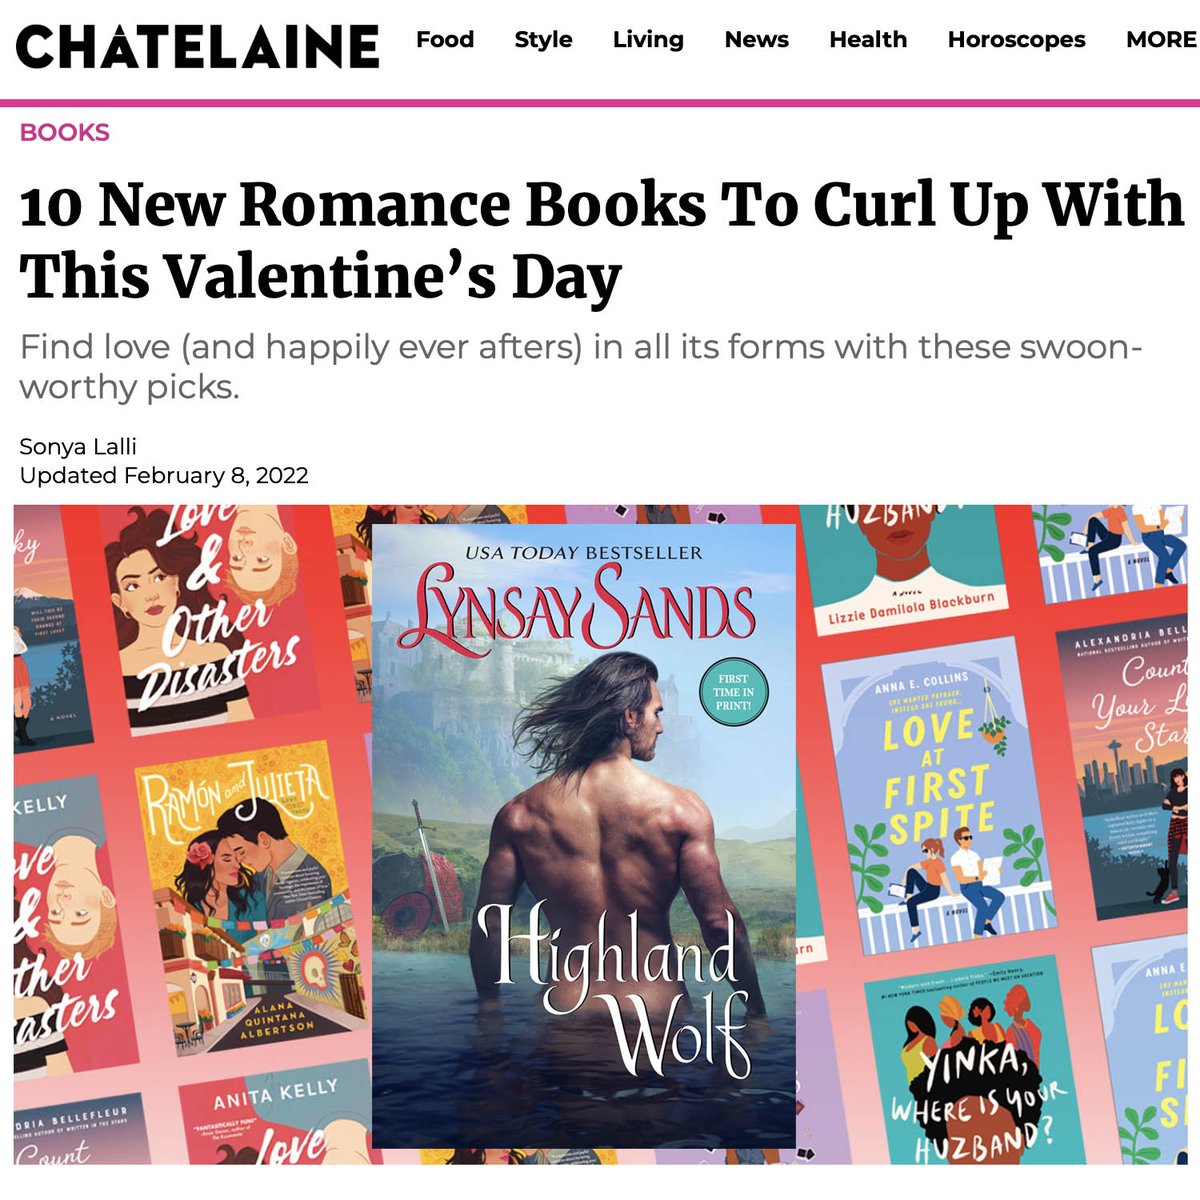 Have some great news… Highland Wolf was picked by Chatelaine as one of their top 10 Valentine’s Day romance picks! ❤️

Link to the article… chatelaine.com/living/books/n…

#HighlandWolf #Chatelaine #ValentinesDayRomance